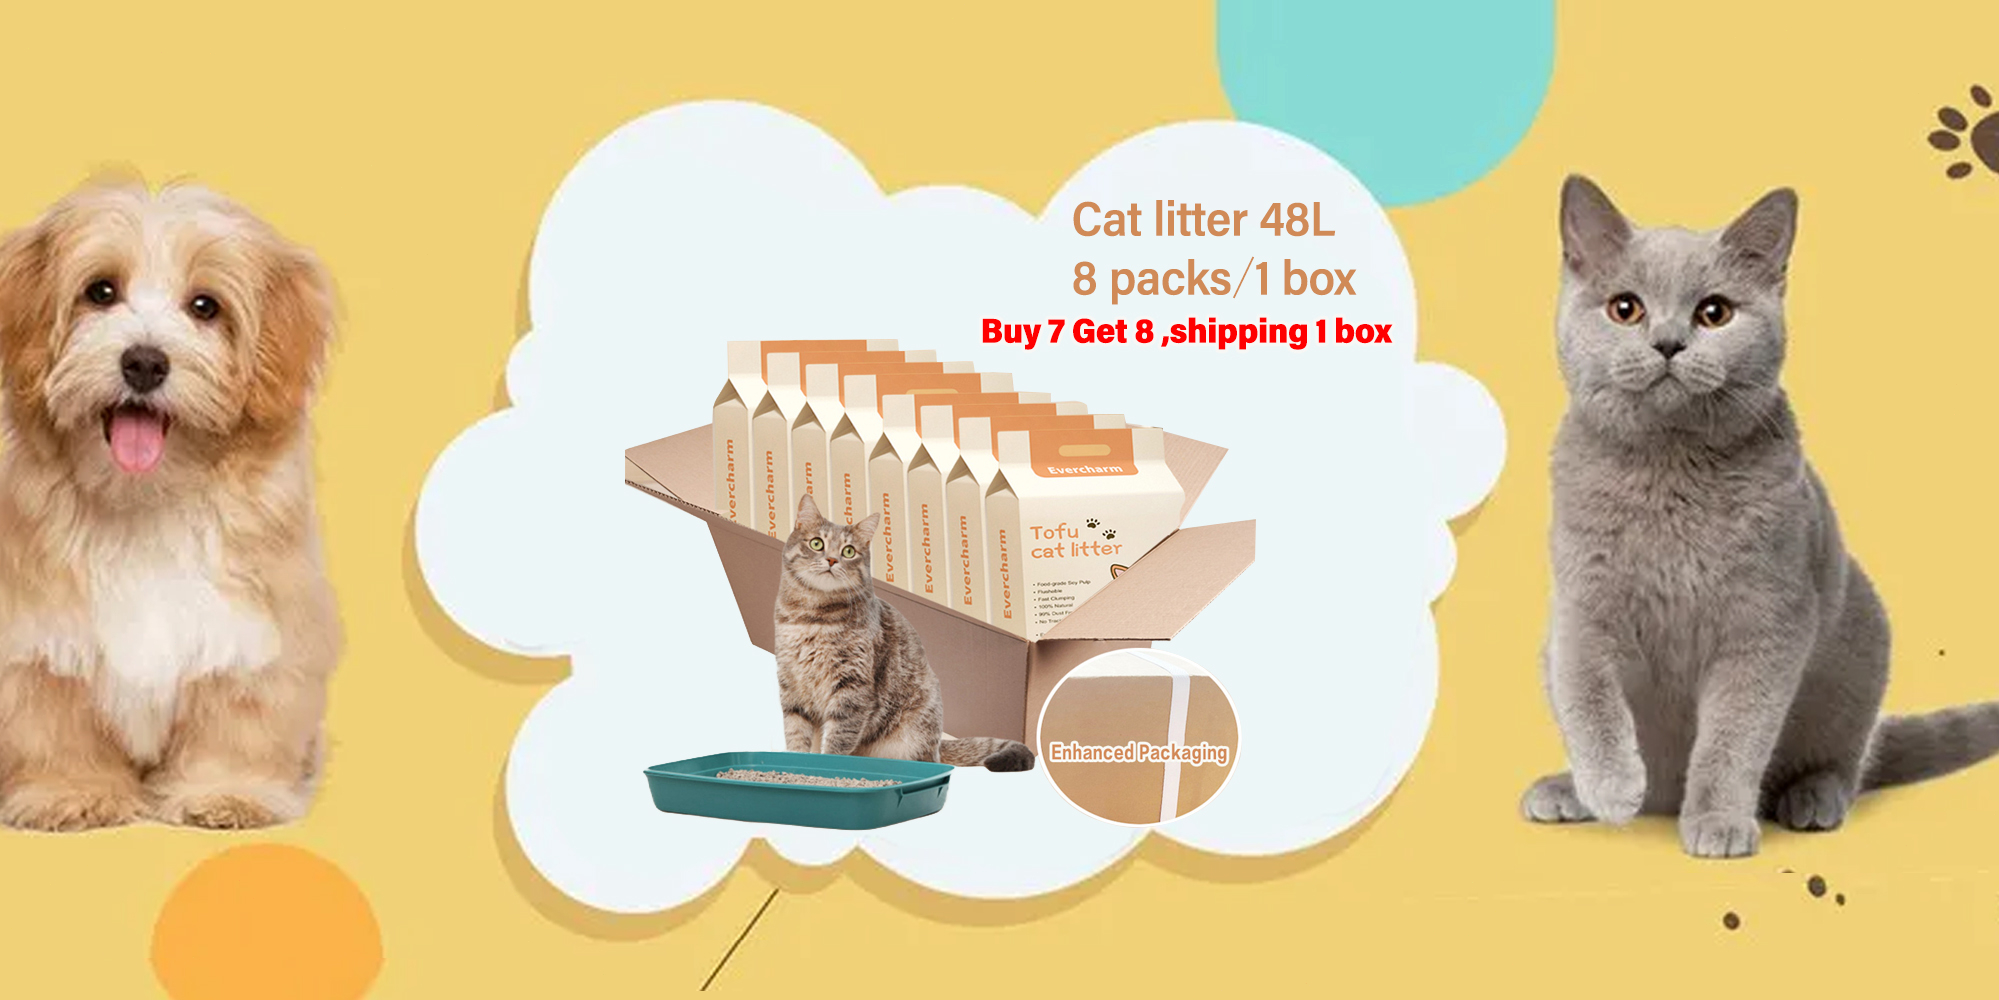 Teling 4 Pcs Disposable Cat Litter Box Double Layer Waterproof Cat Litter  Tray Foldable Travel Litter Box for Kitty Portable Cat Litter Box for Cat